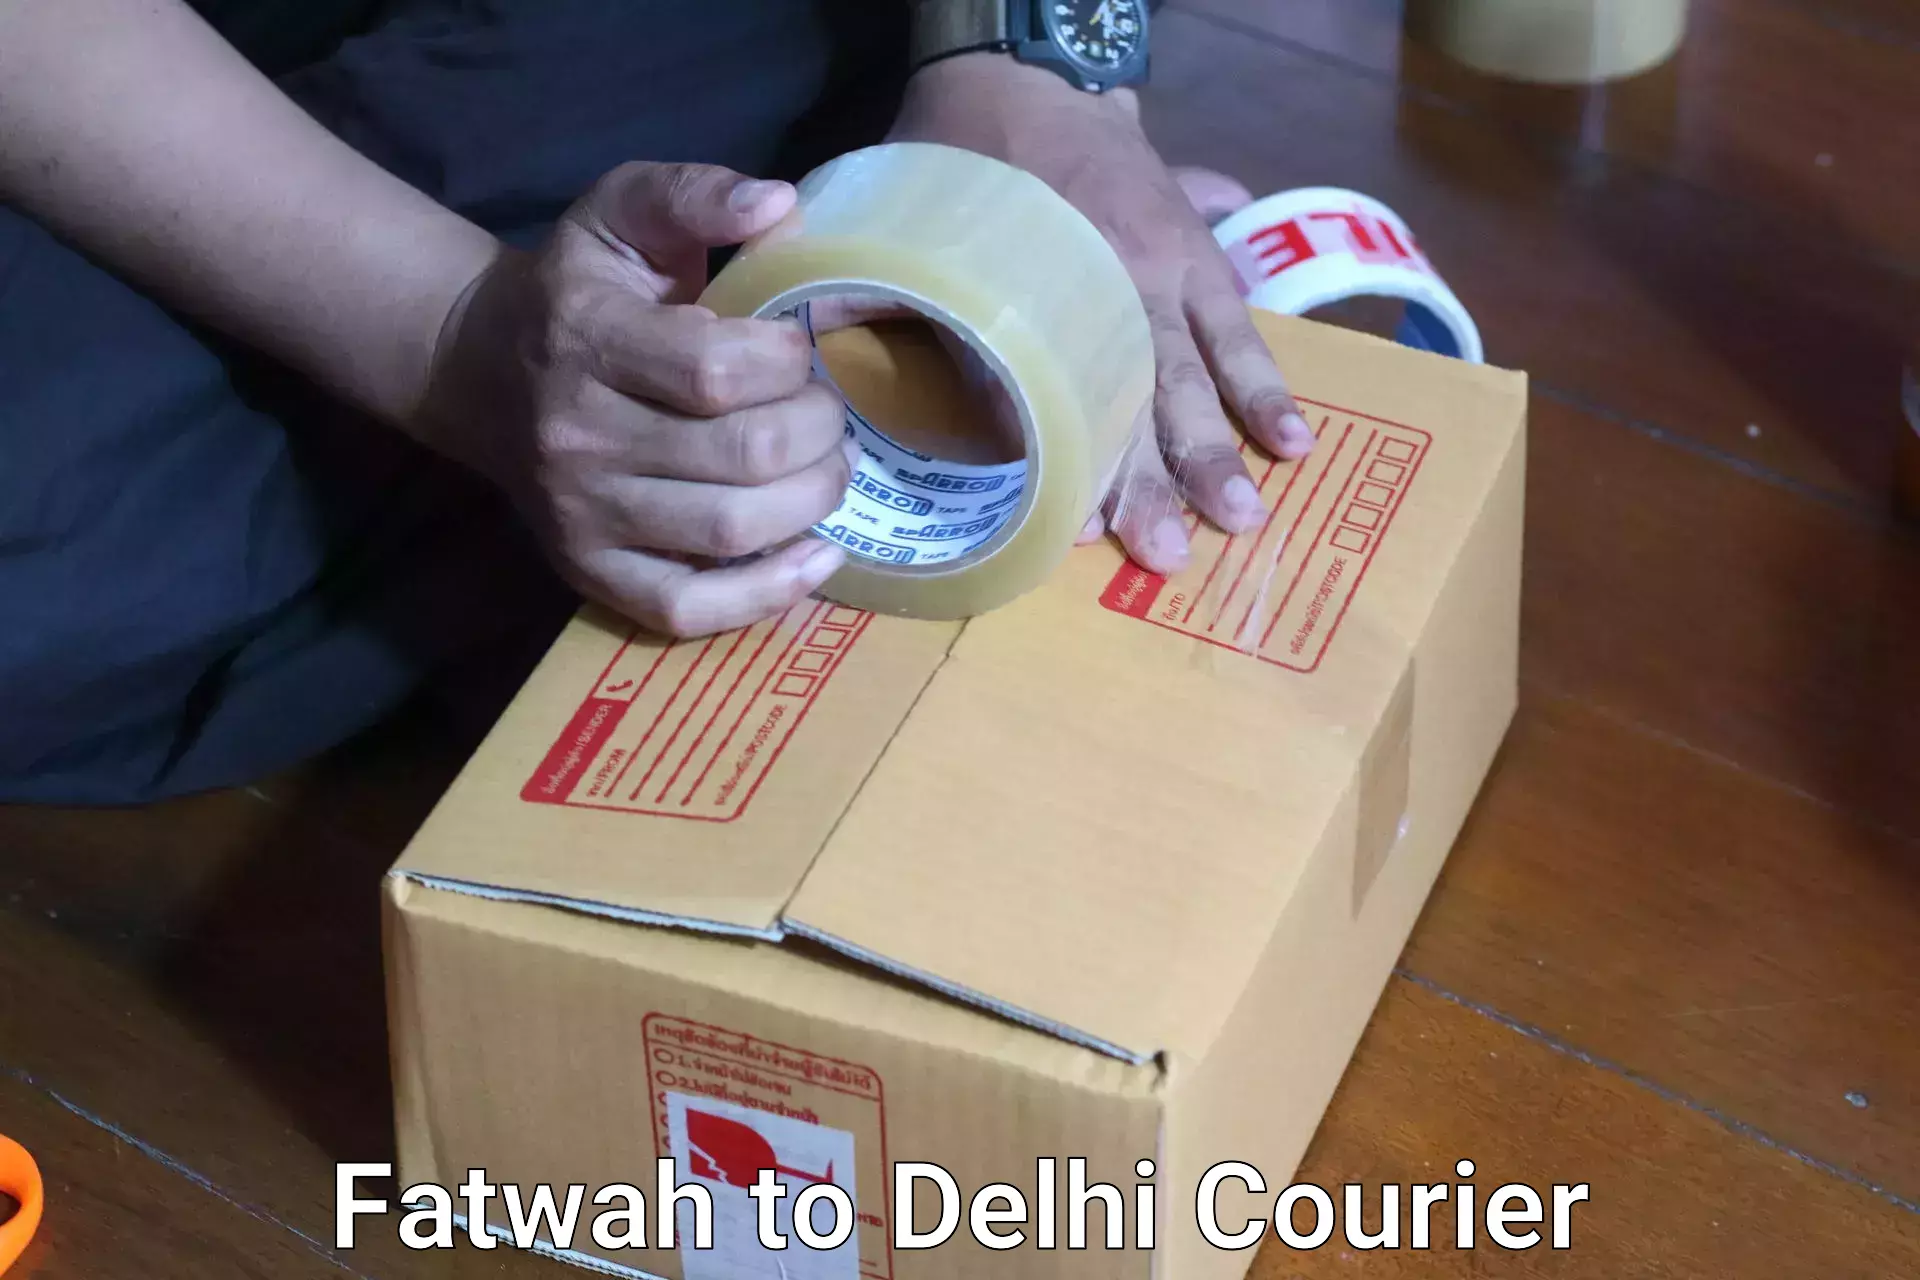 Efficient luggage delivery Fatwah to NCR